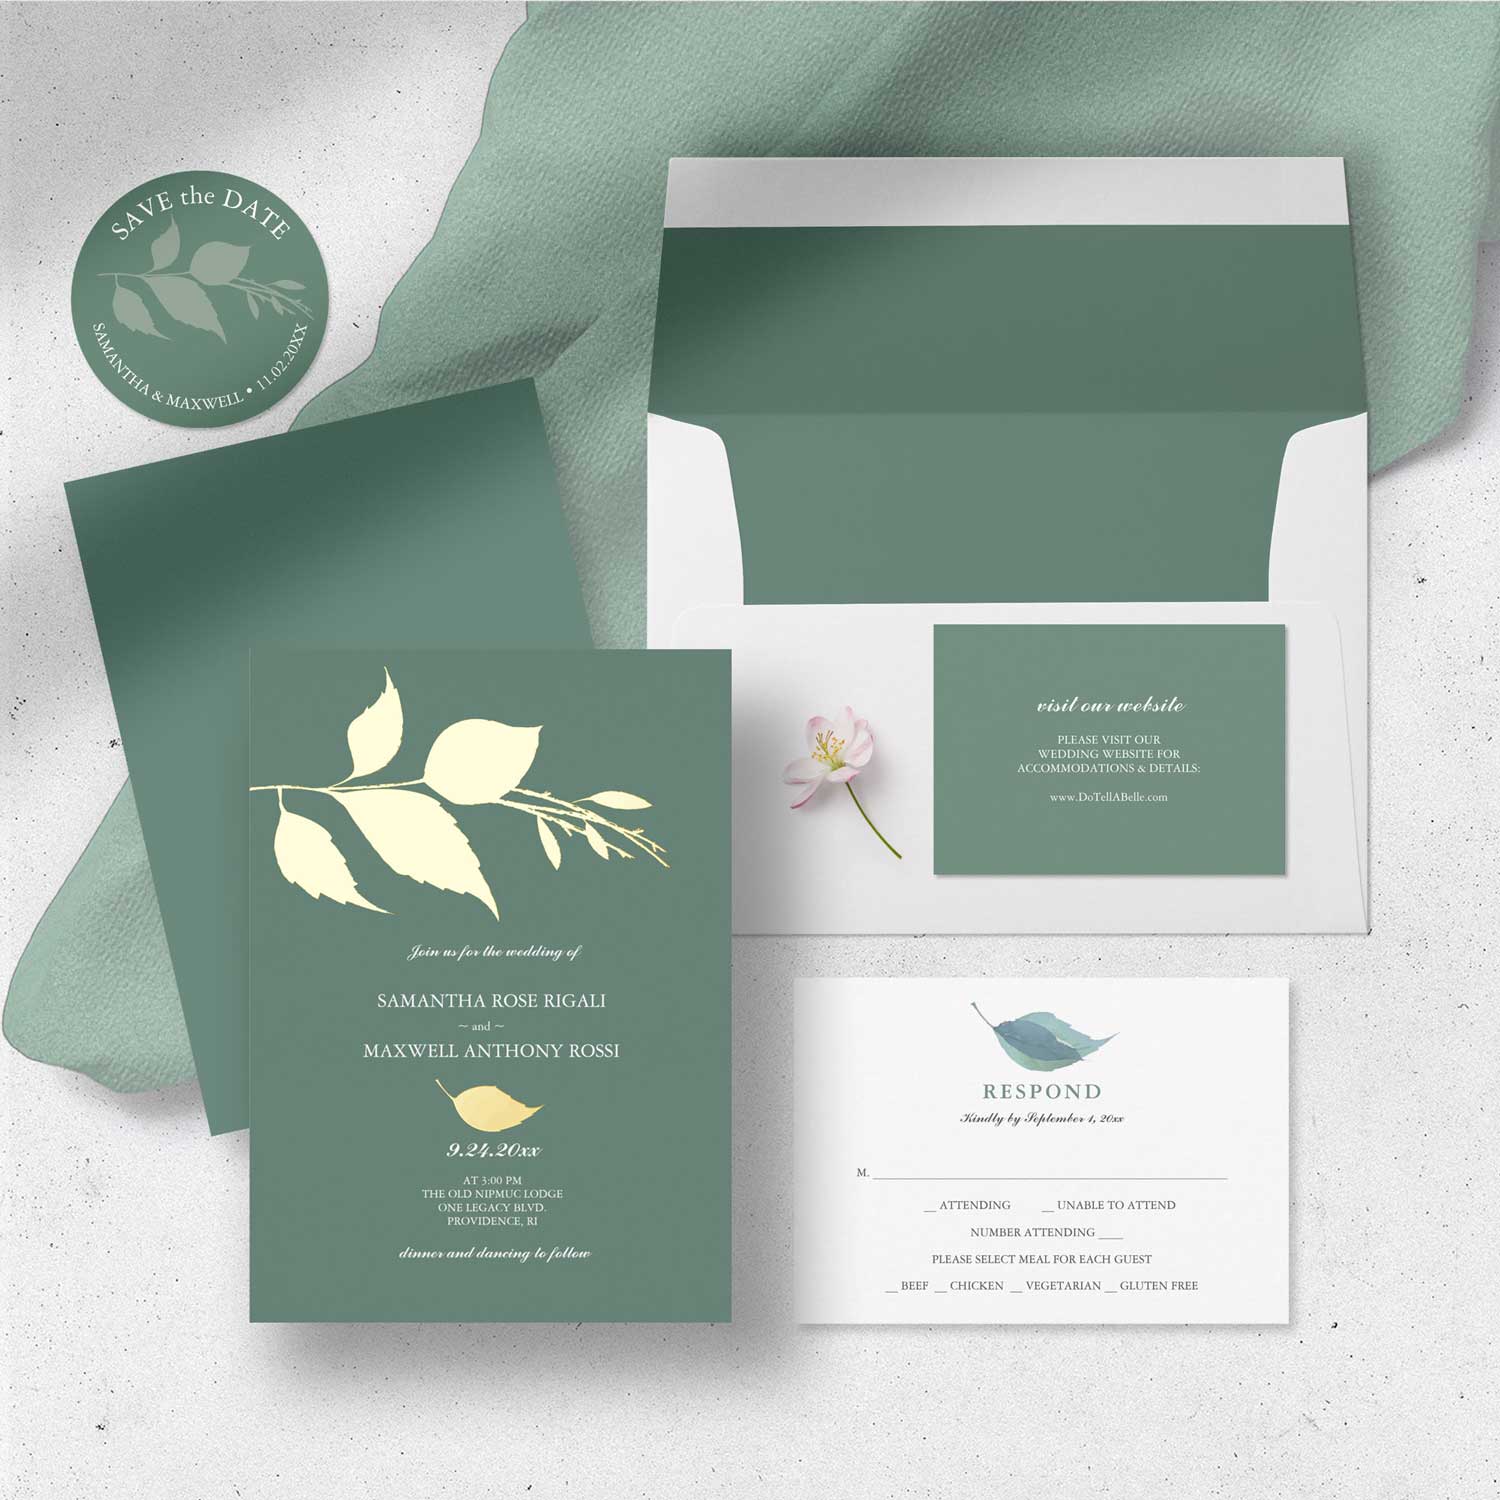 Green wedding invitation theme. Click to see more from this suite on Zazzle.